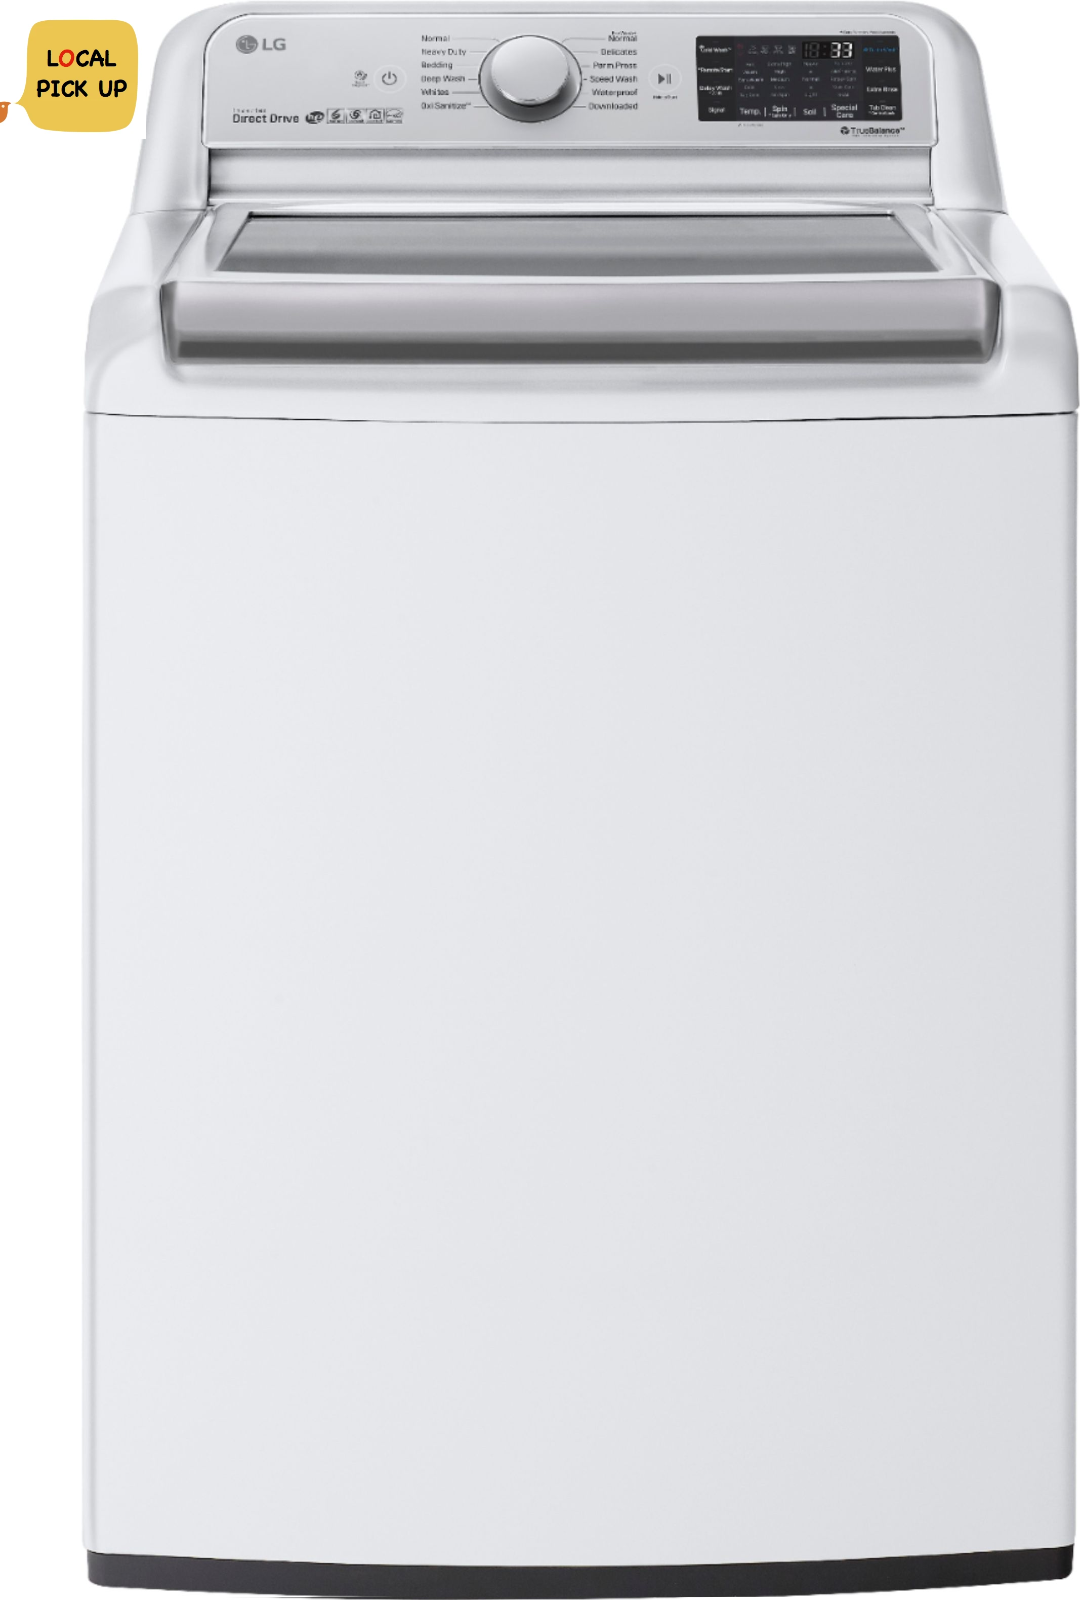 LG WT7800CW 5.5 Cu. Ft. High-Efficiency Smart Top-Load Washer ...